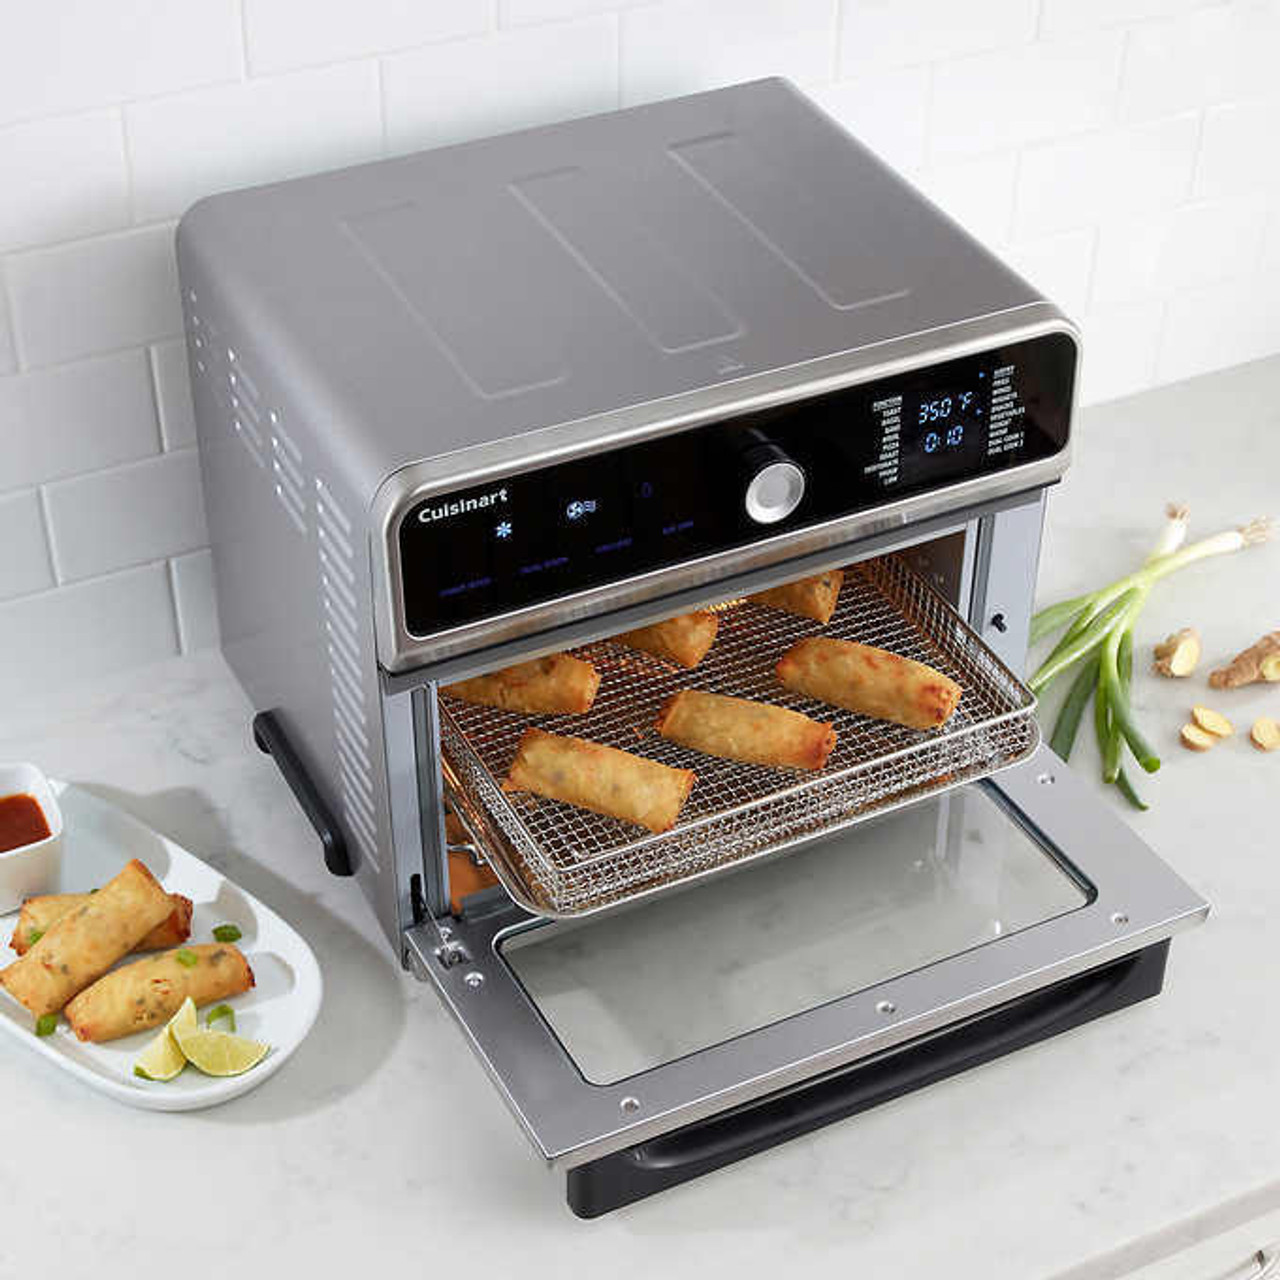 https://cdn11.bigcommerce.com/s-g5ygv2at8j/images/stencil/1280x1280/products/13779/30868/cuisinart-digital-air-fryer-convection-toaster-oven__28986.1694498529.jpg?c=1